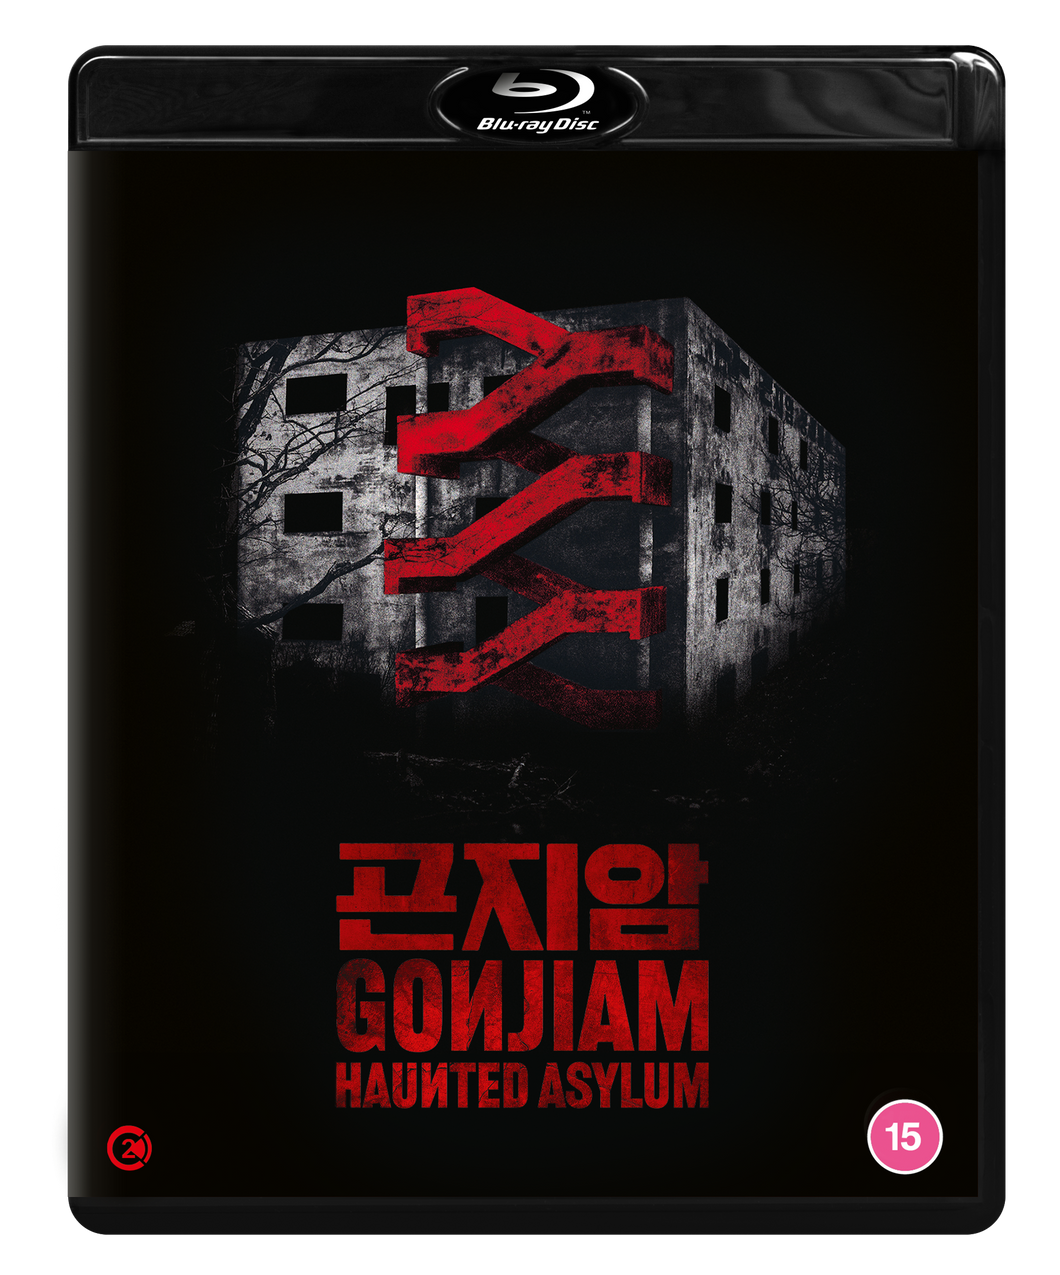 Gonjiam: Haunted Asylum Blu-ray: Pre-order Available June 17th